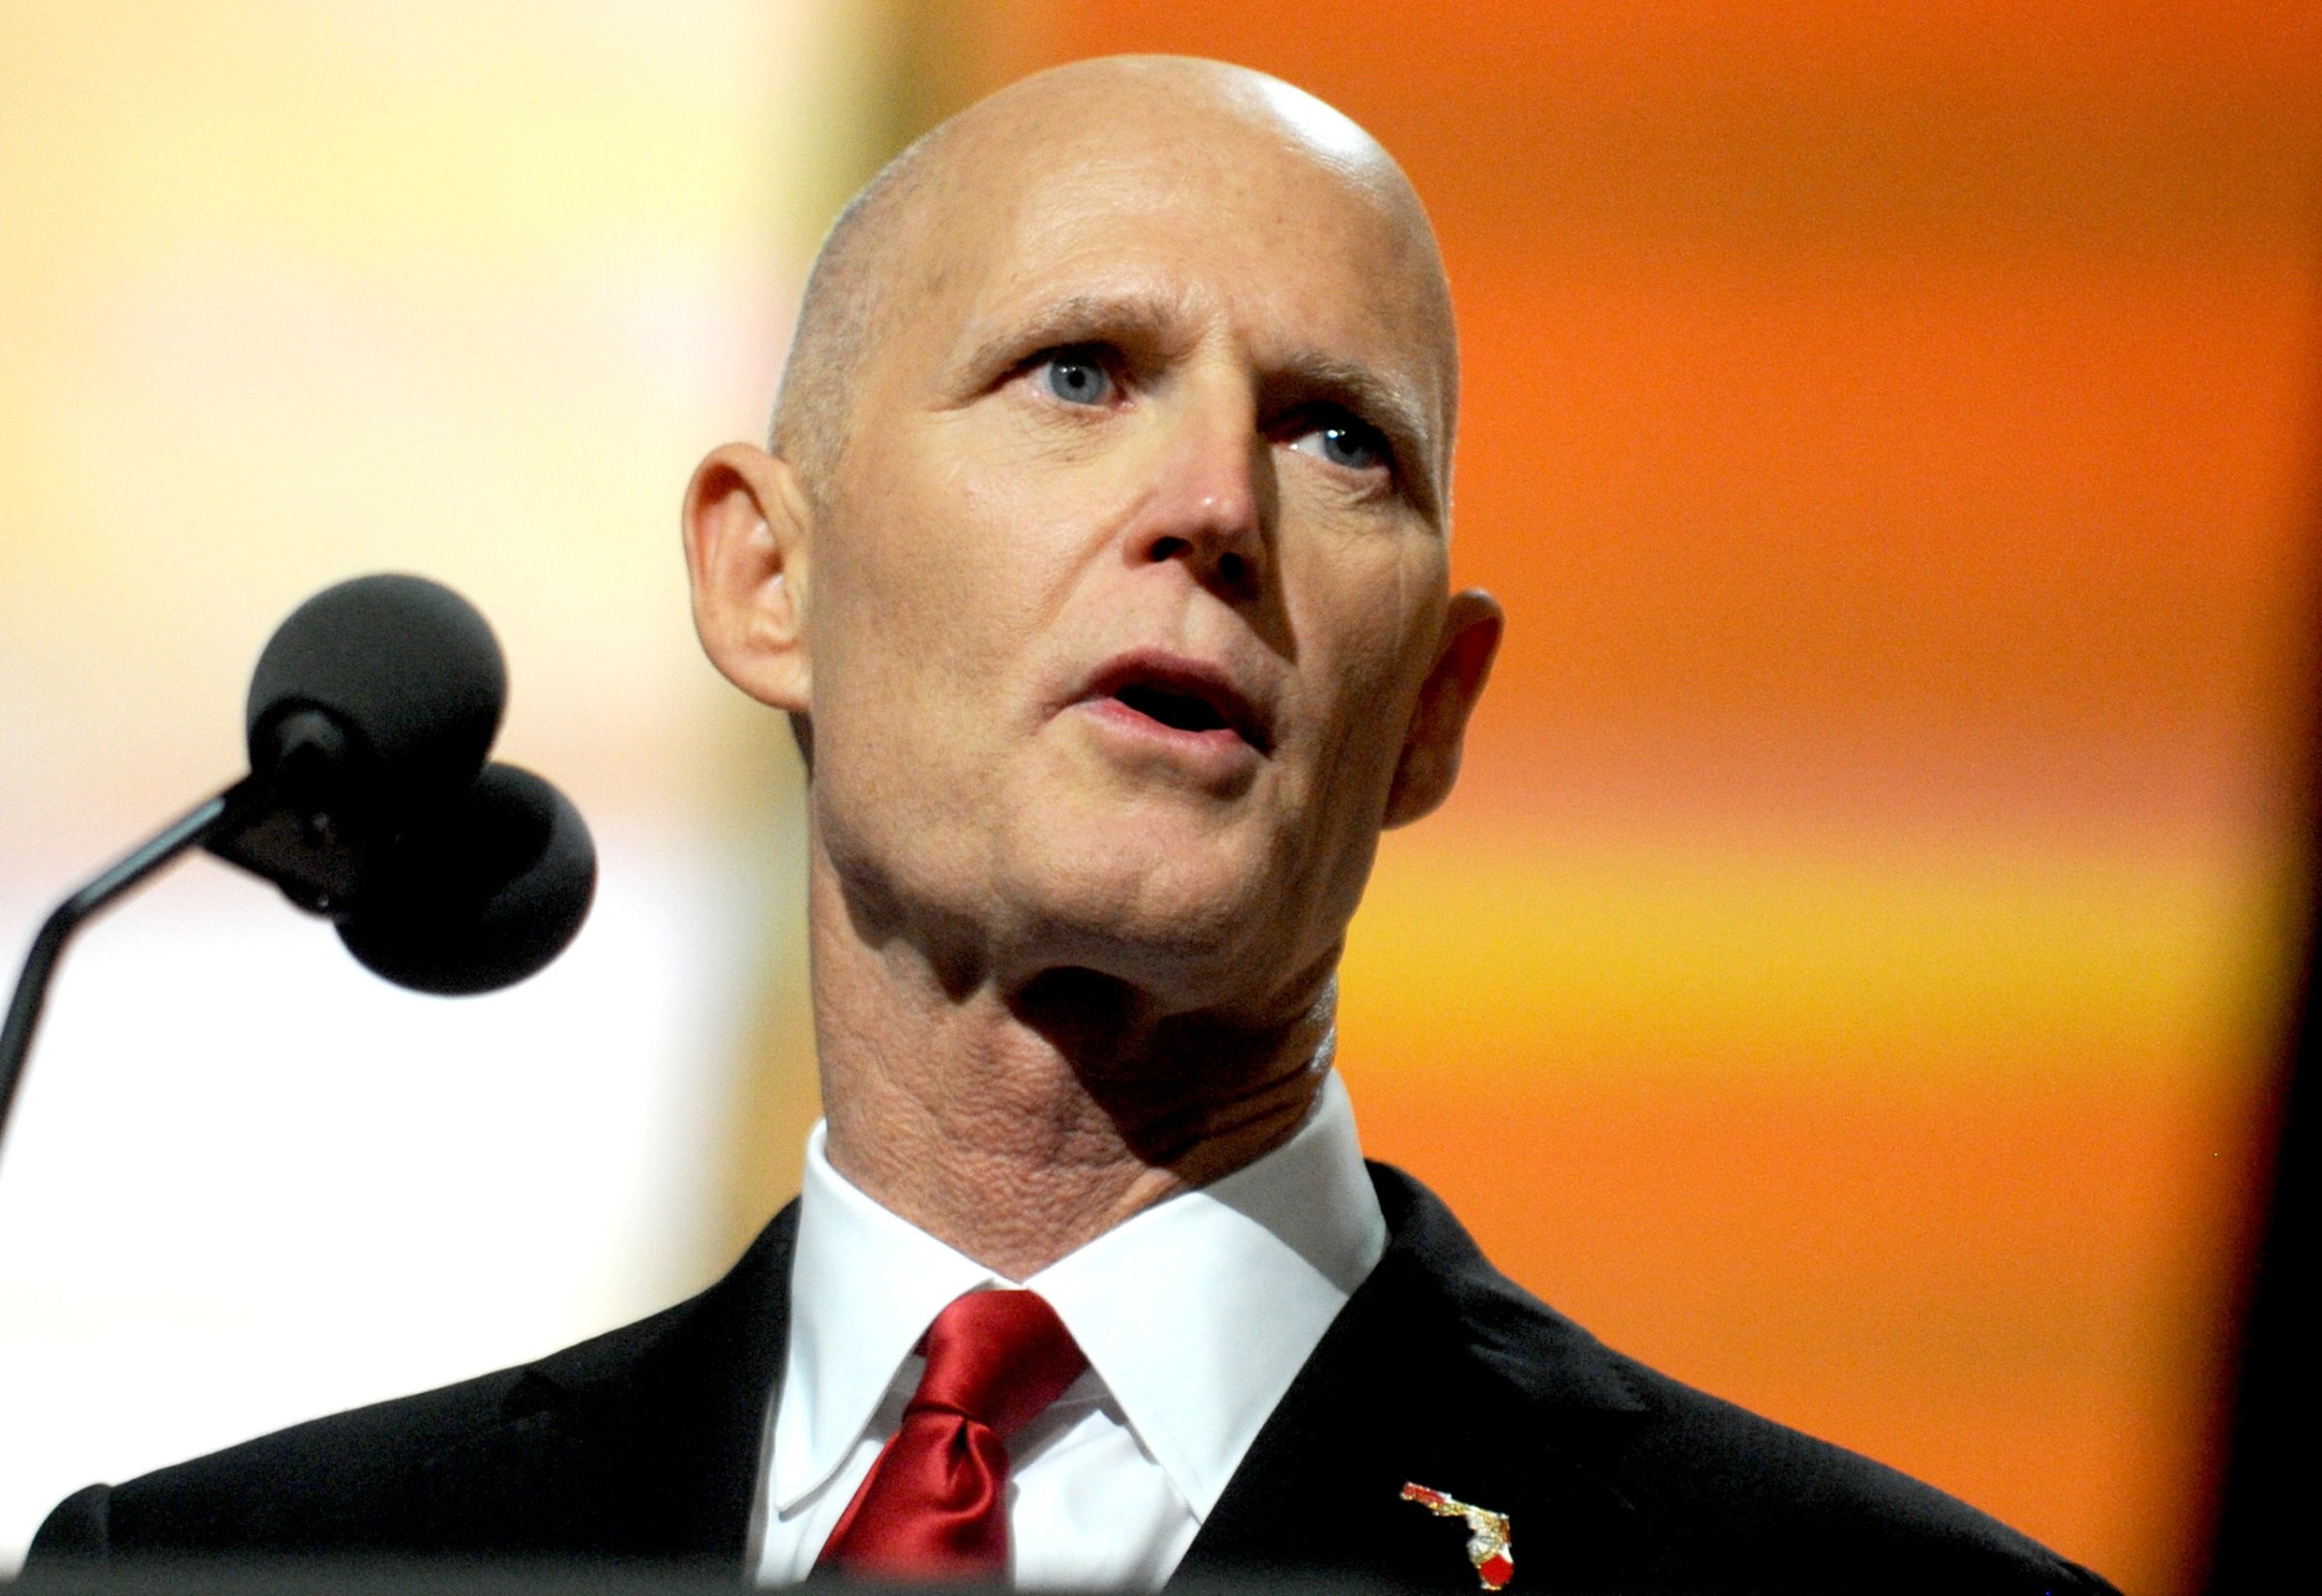 Florida Governor Rick Scott delivers a speech on the third day of the Republican National Convention on July 20, 2016 at the Quicken Loans Arena in Cleveland, Ohio. Republican presidential candidate Donald Trump received the number of votes needed to secure the party's nomination. An estimated 50,000 people are expected in Cleveland, including hundreds of protesters and members of the media. The four-day Republican National Convention kicked off on July 18. Photo by Dennis van Tine/Sipa USA